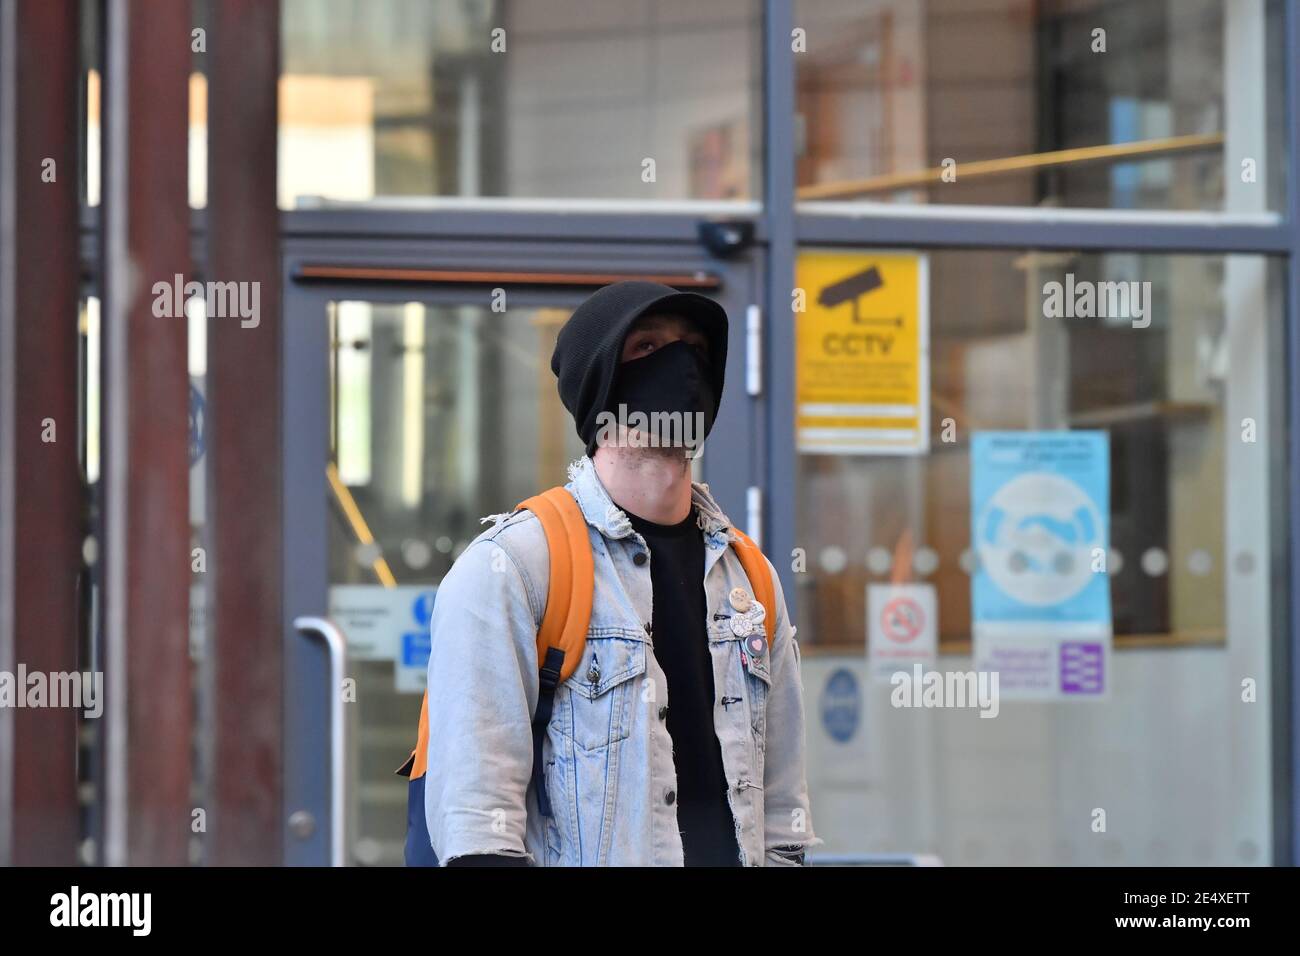 Jake Skuse, 32, arrives at Bristol Magistrates' Court where he and three others are appearing charged with criminal damage over the toppling of the Edward Colston statue in Bristol during the Black Lives Matter protests in June last year. Picture date: Monday January 25, 2021. Stock Photo